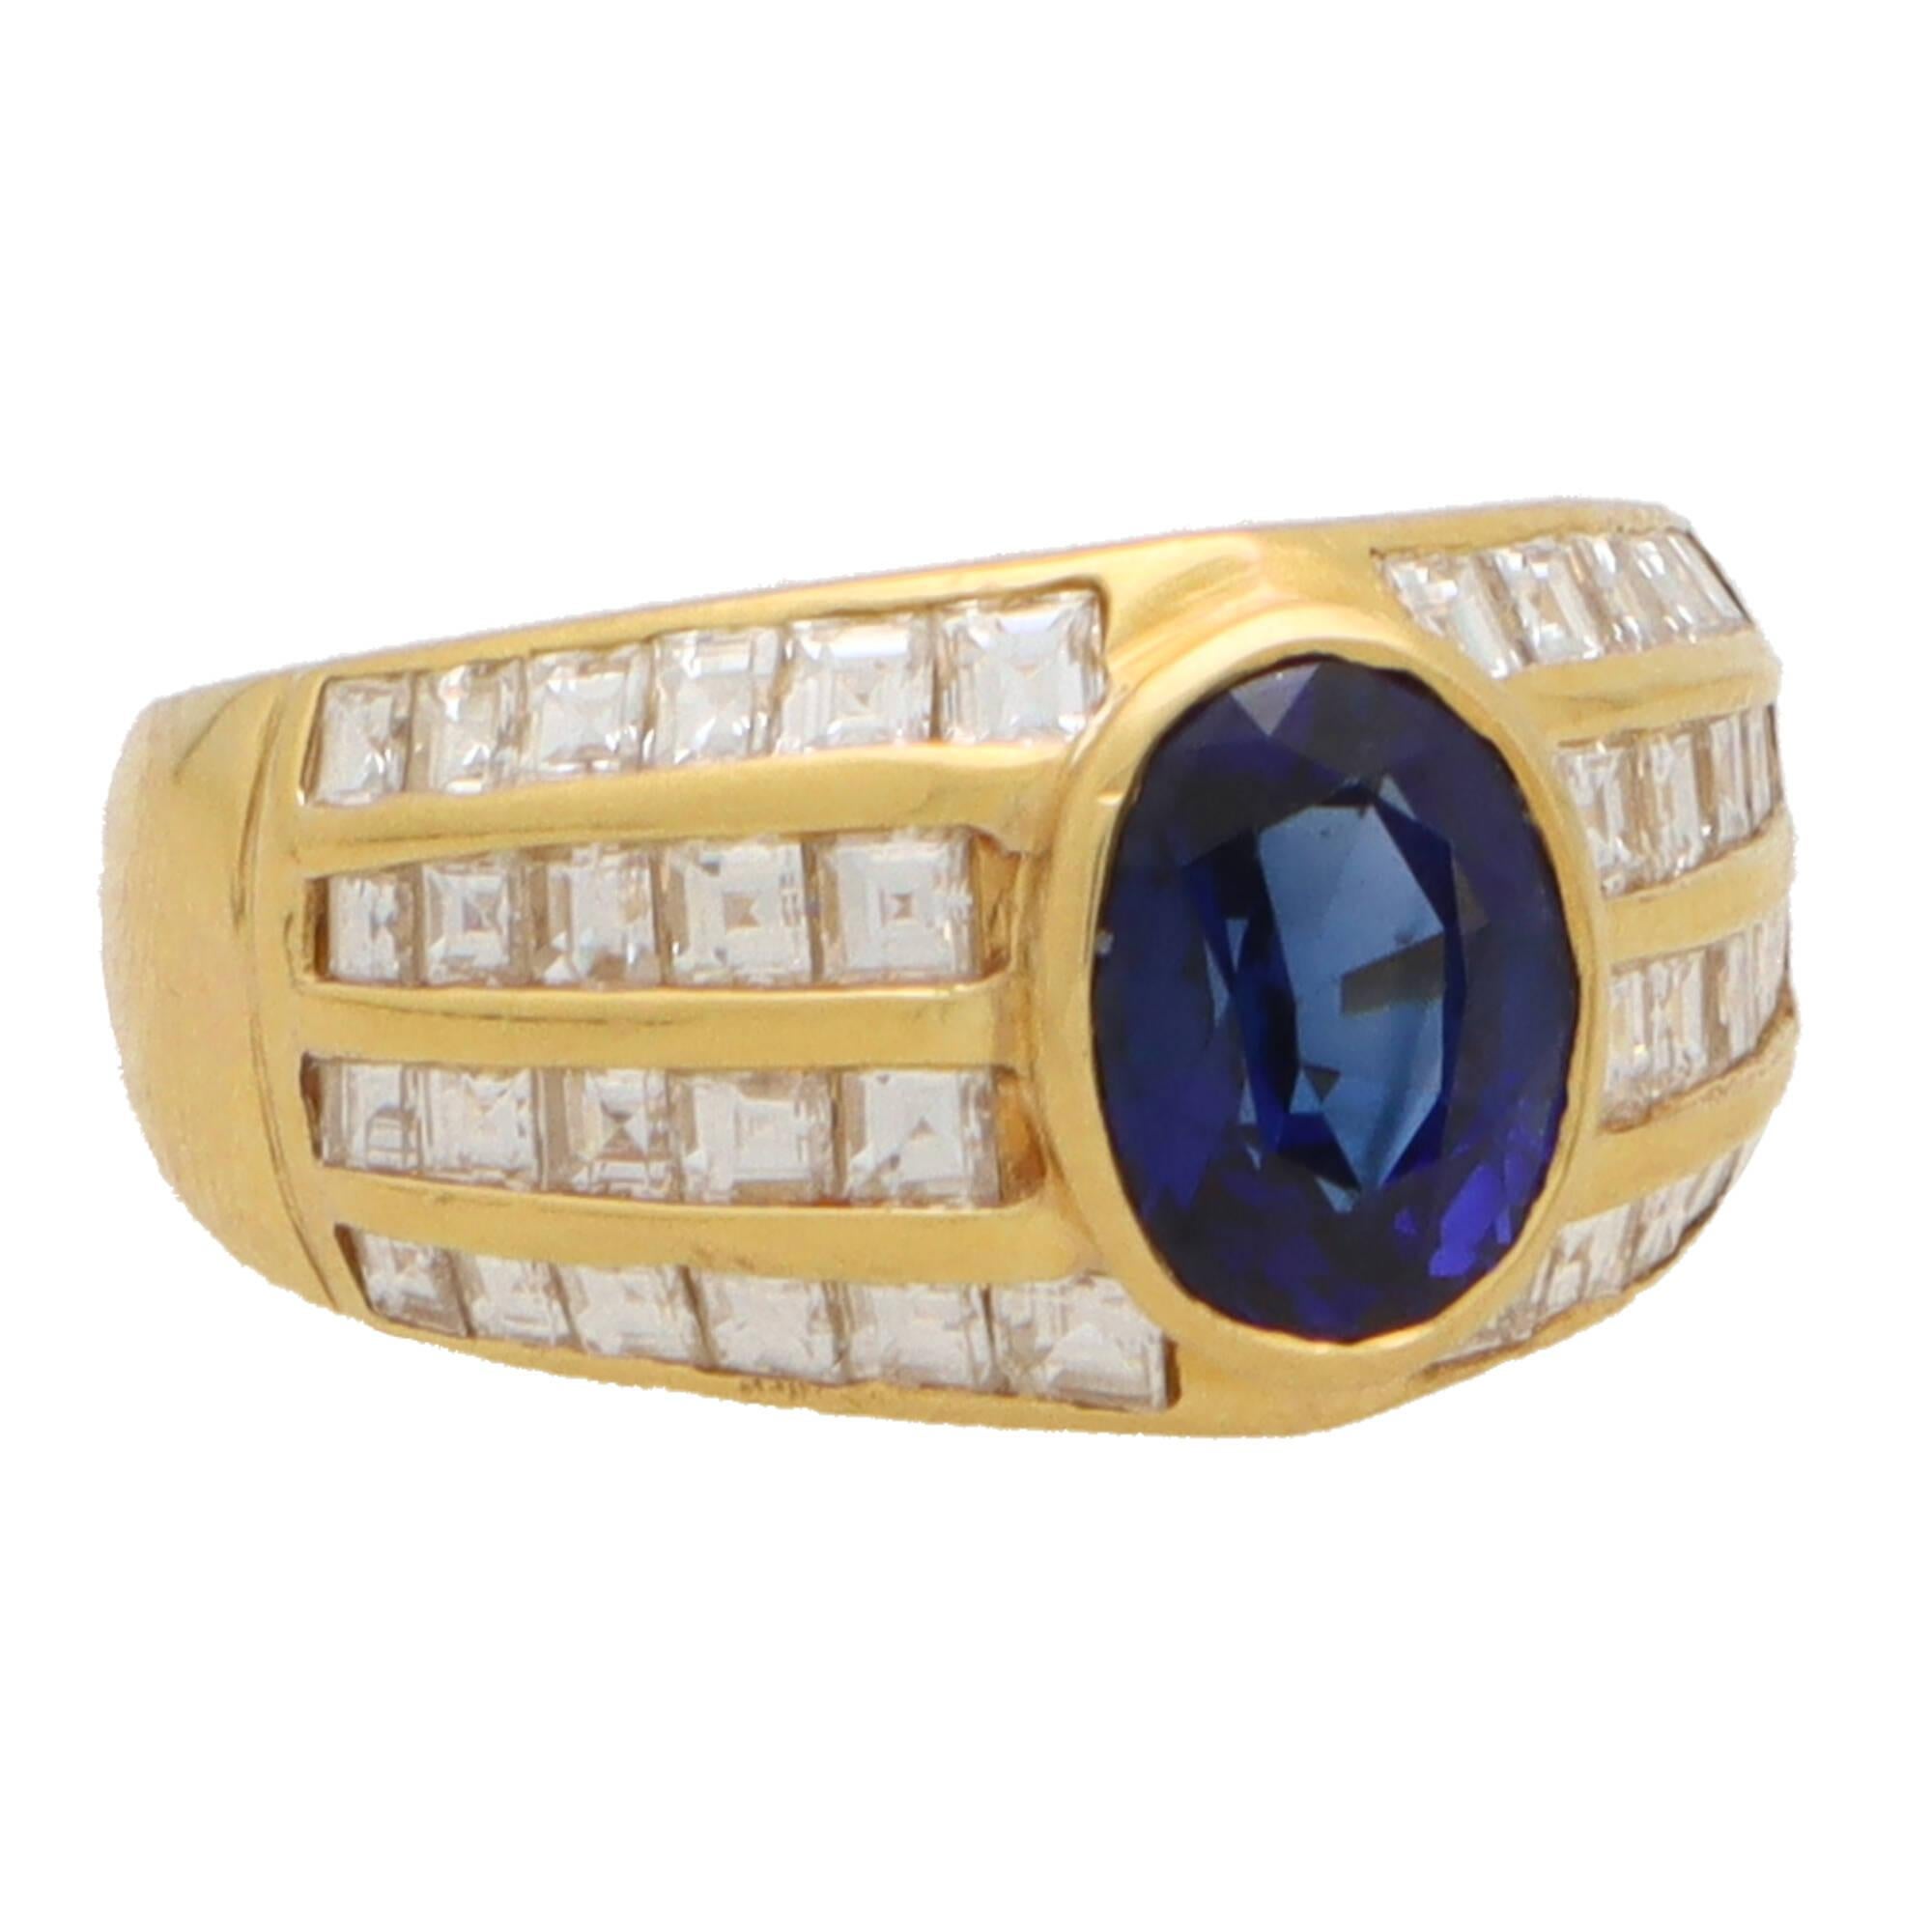  A beautiful vintage 1980's blue sapphire and diamond dress ring set in 18k yellow gold.

The ring is composed in an iconic 80's design, set centrally with an oval cut blue sapphire. The sapphire is rub over set securely in yellow gold and is